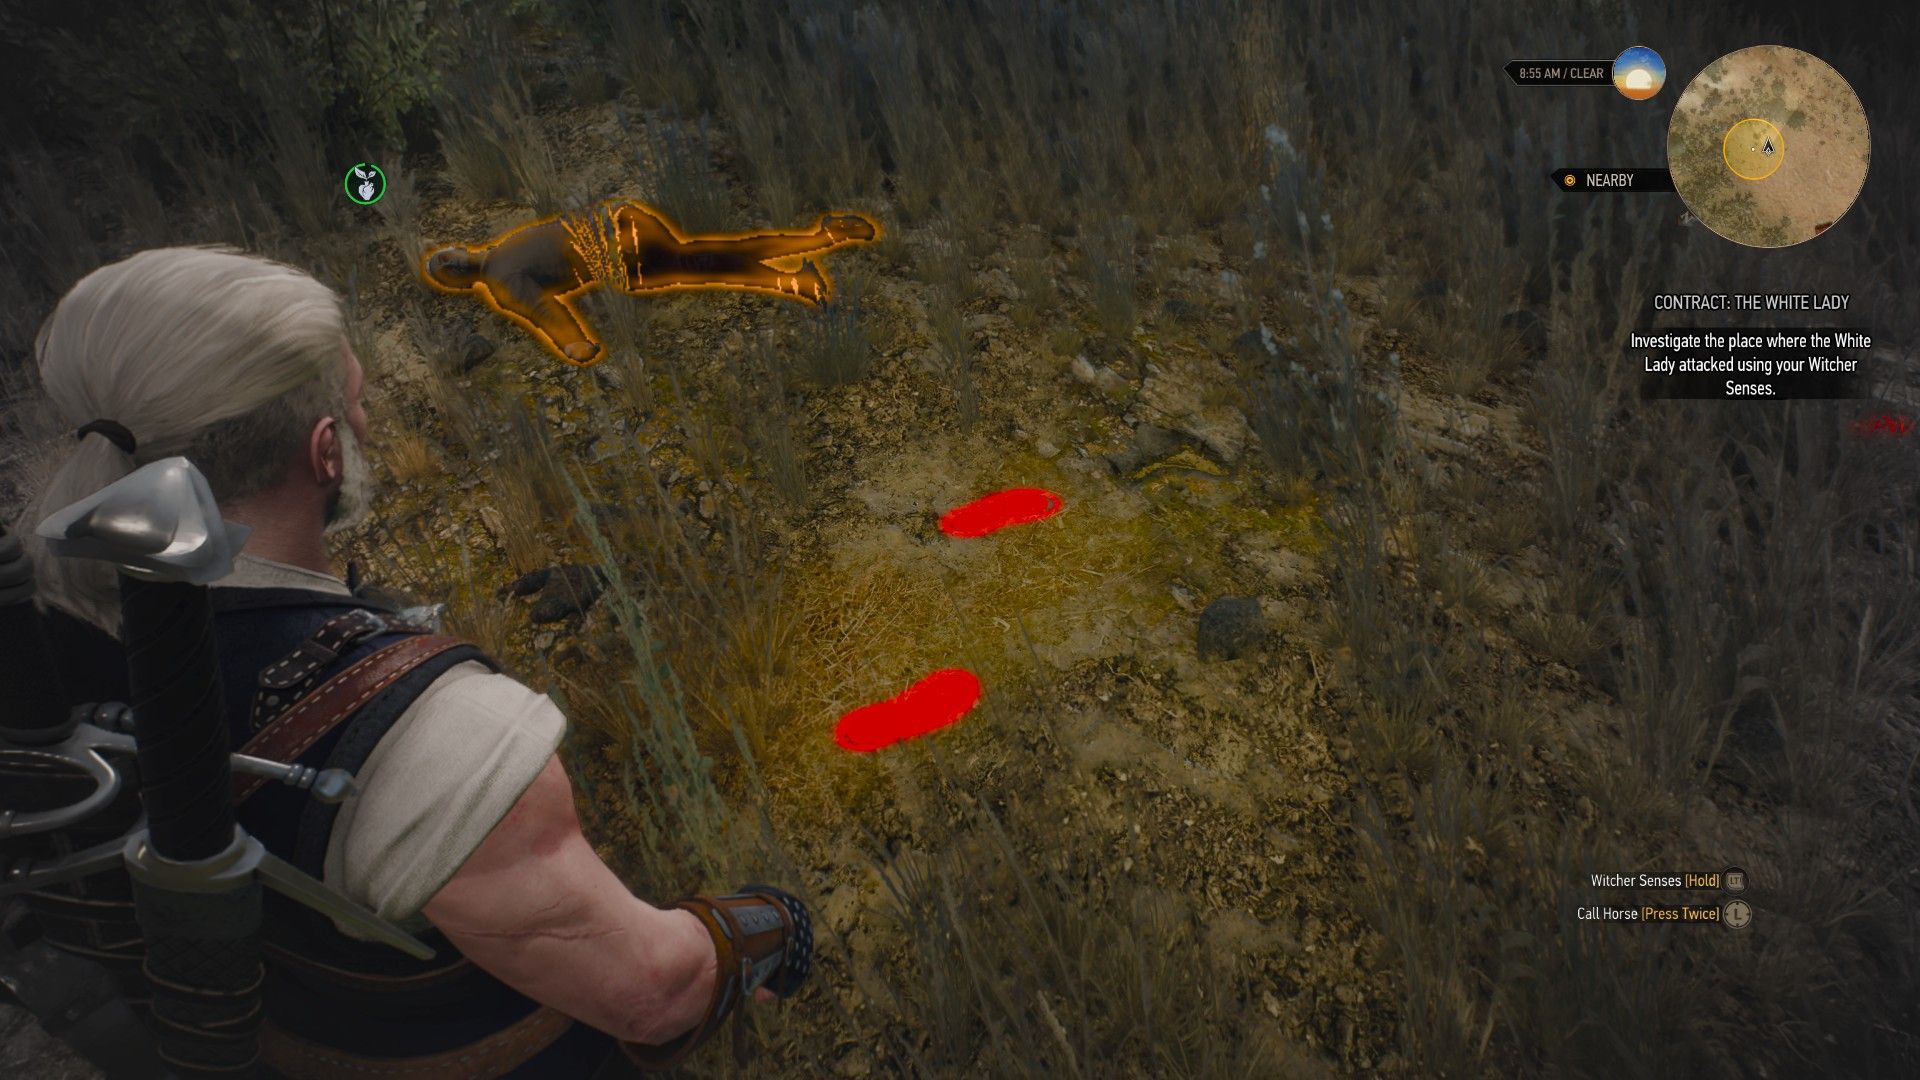 Geralt's Witcher Senses pick up a set of footprints in the dirt leading away from a body.